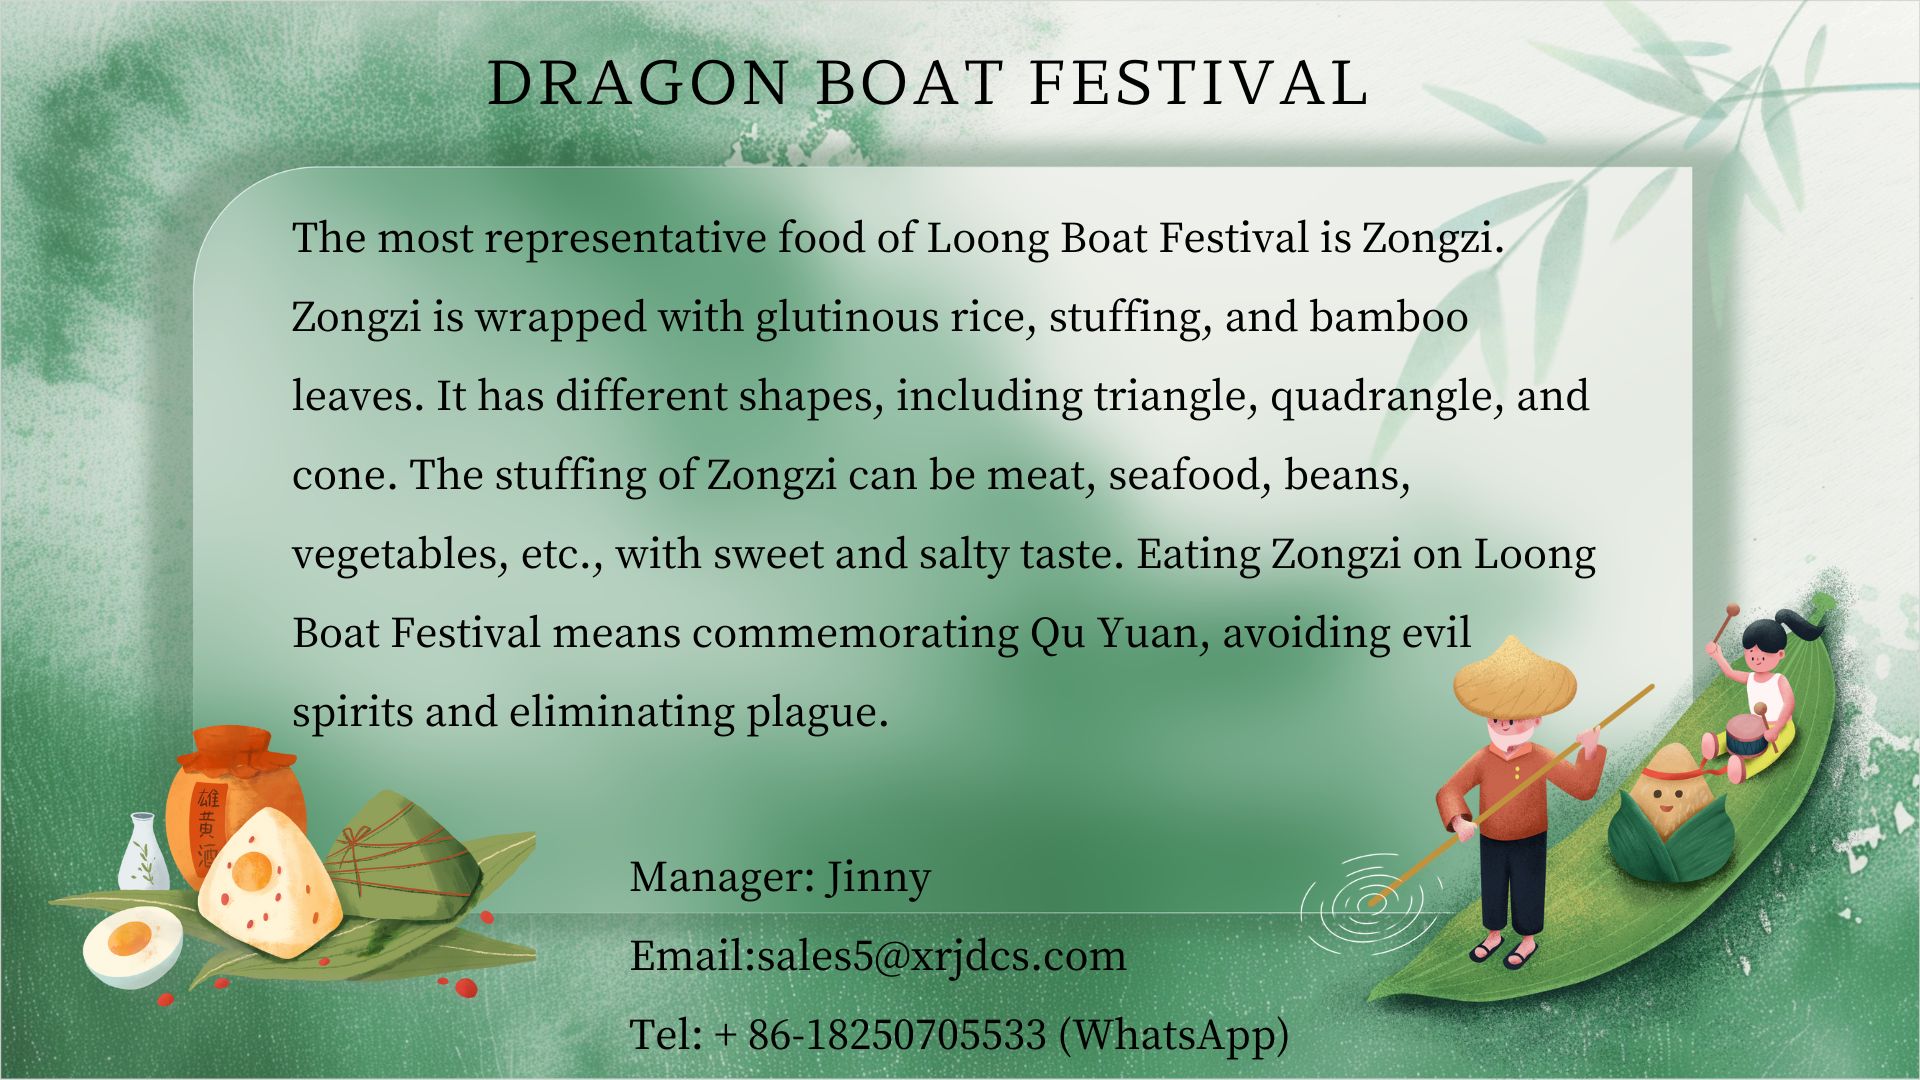 Dragon Boat Festival holiday from 6.8-6.10